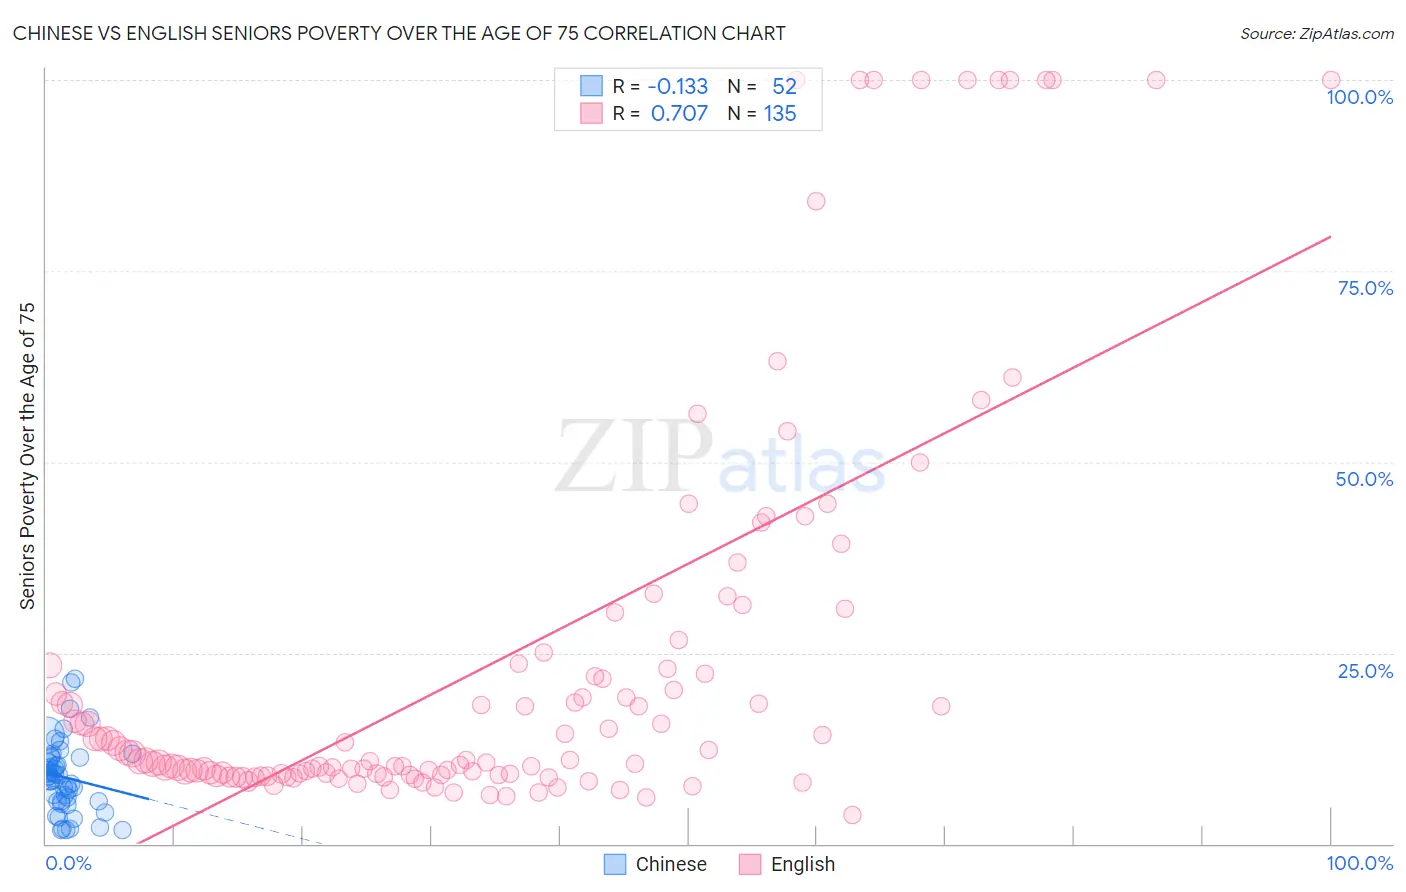 Chinese vs English Seniors Poverty Over the Age of 75